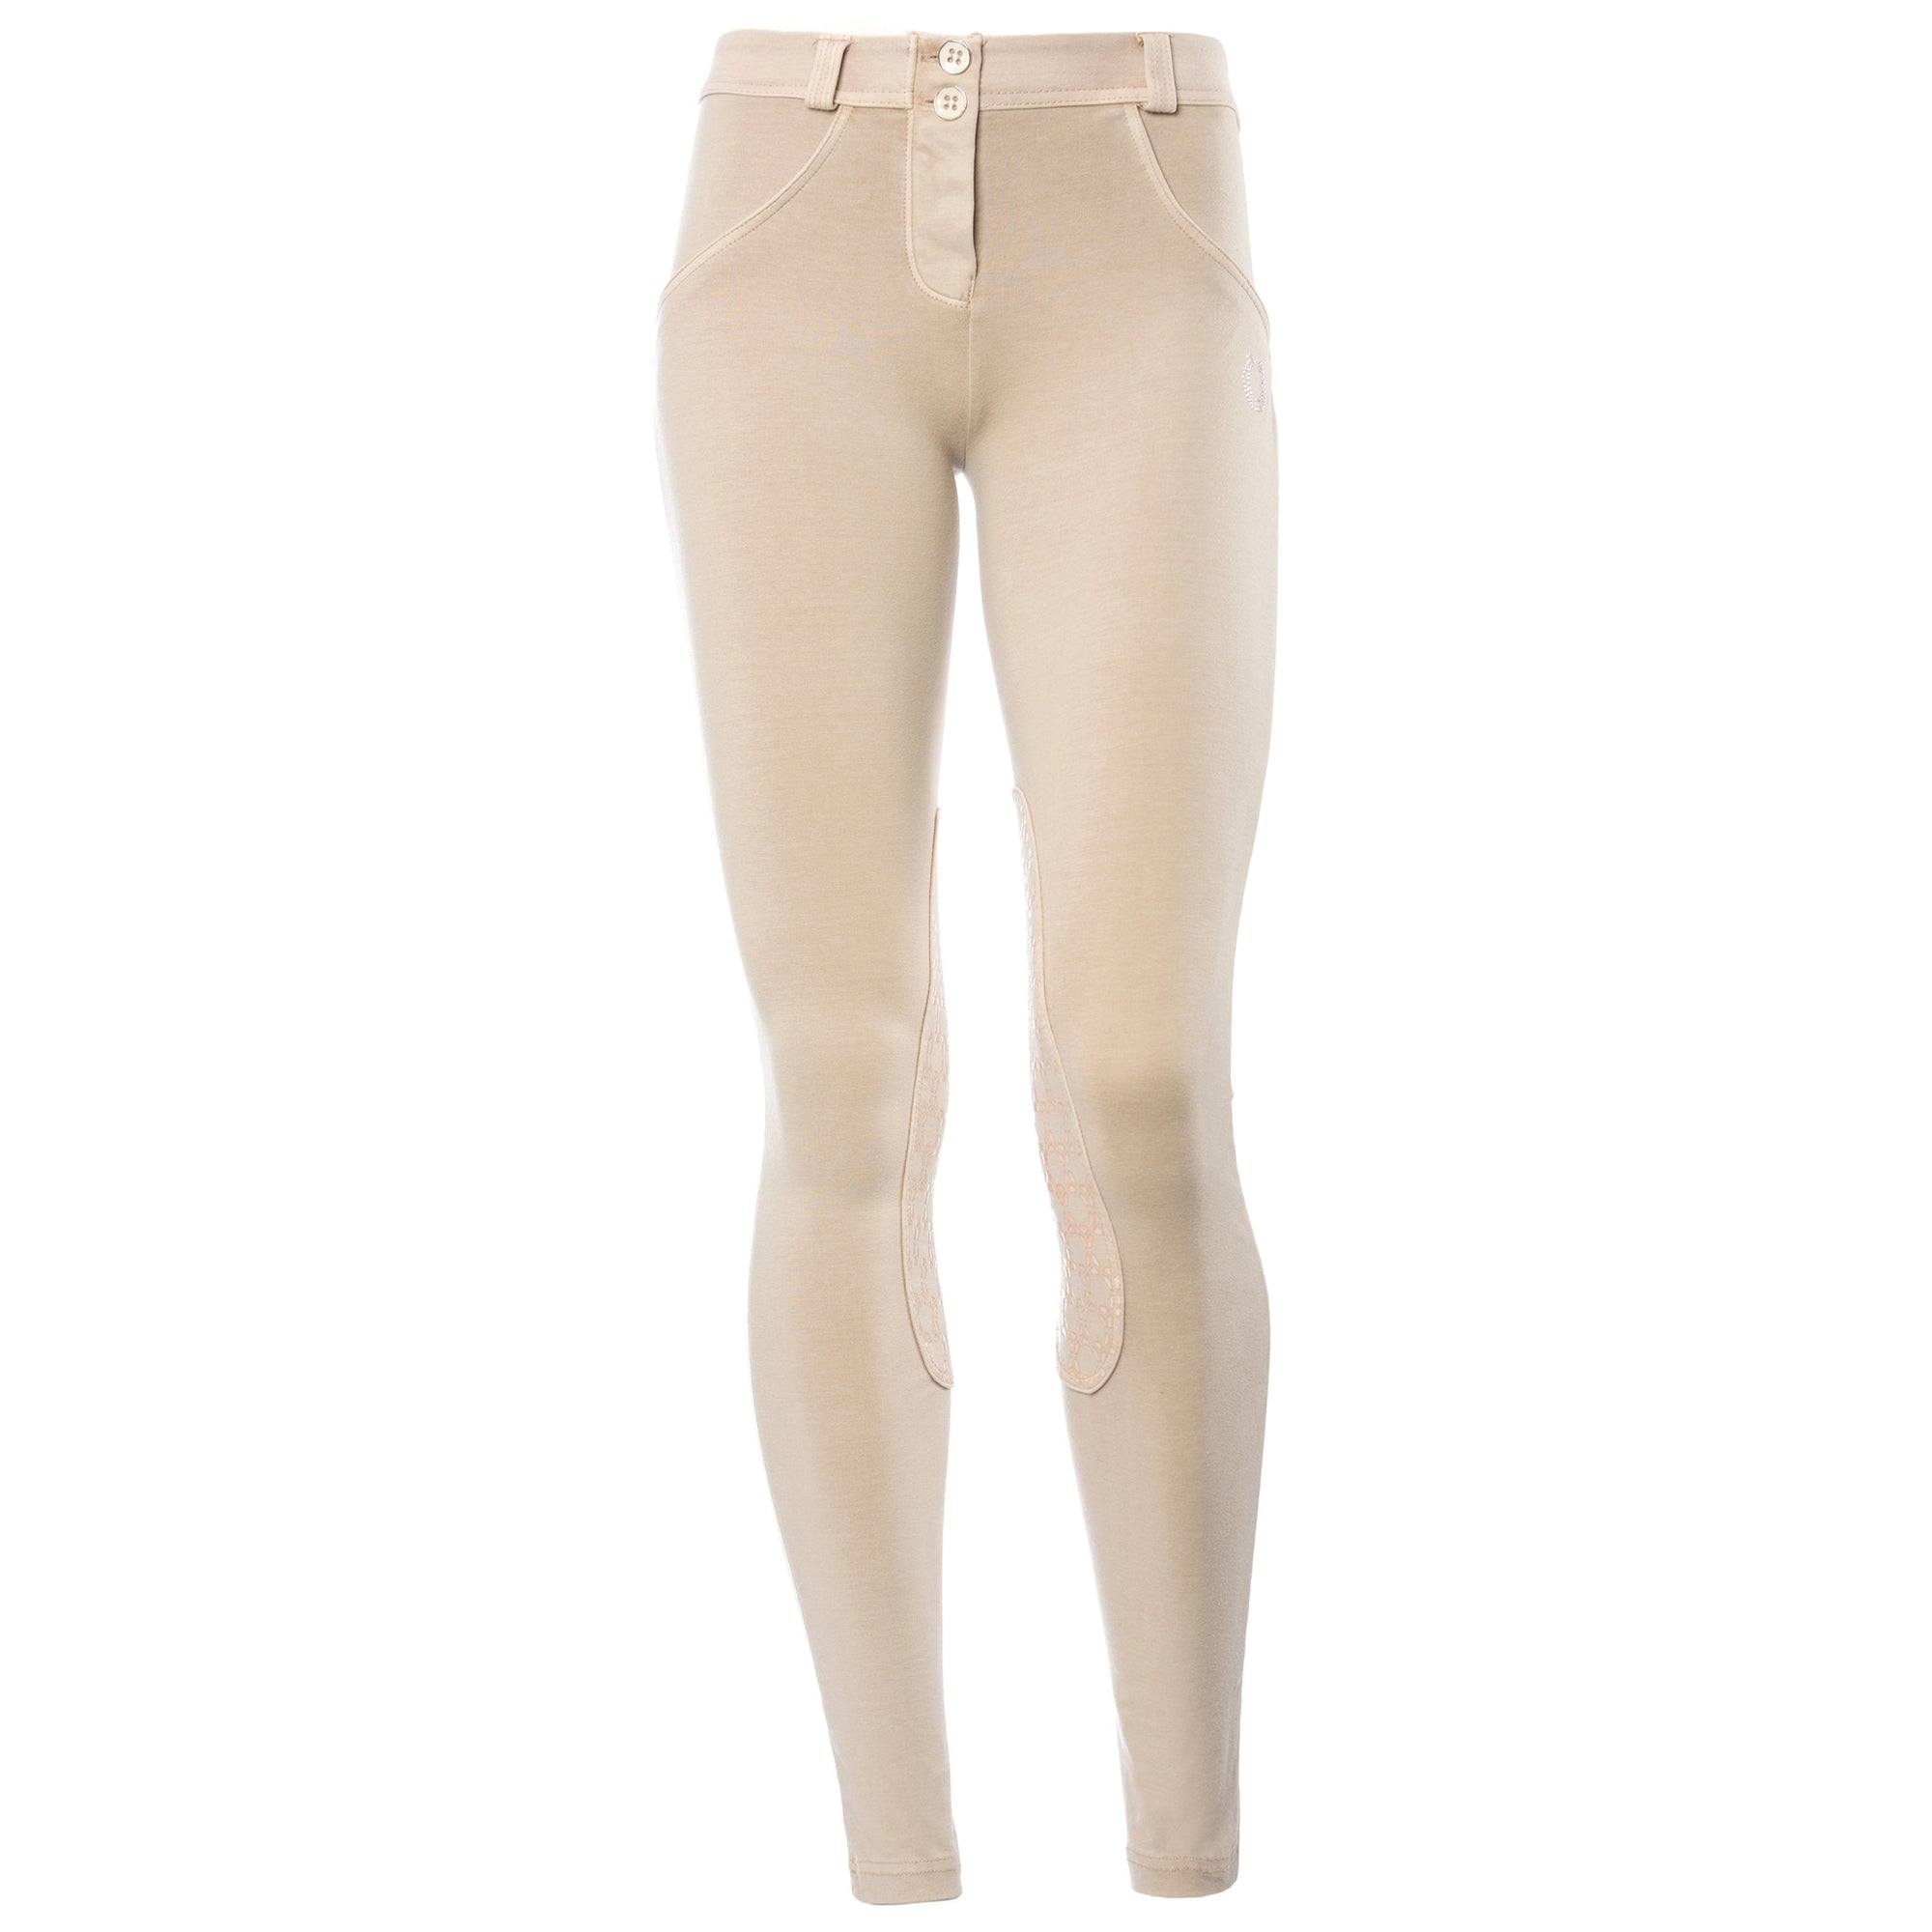 FREDDY WR.UP RIDING PANT - Beige - LIVIFY
 - 2